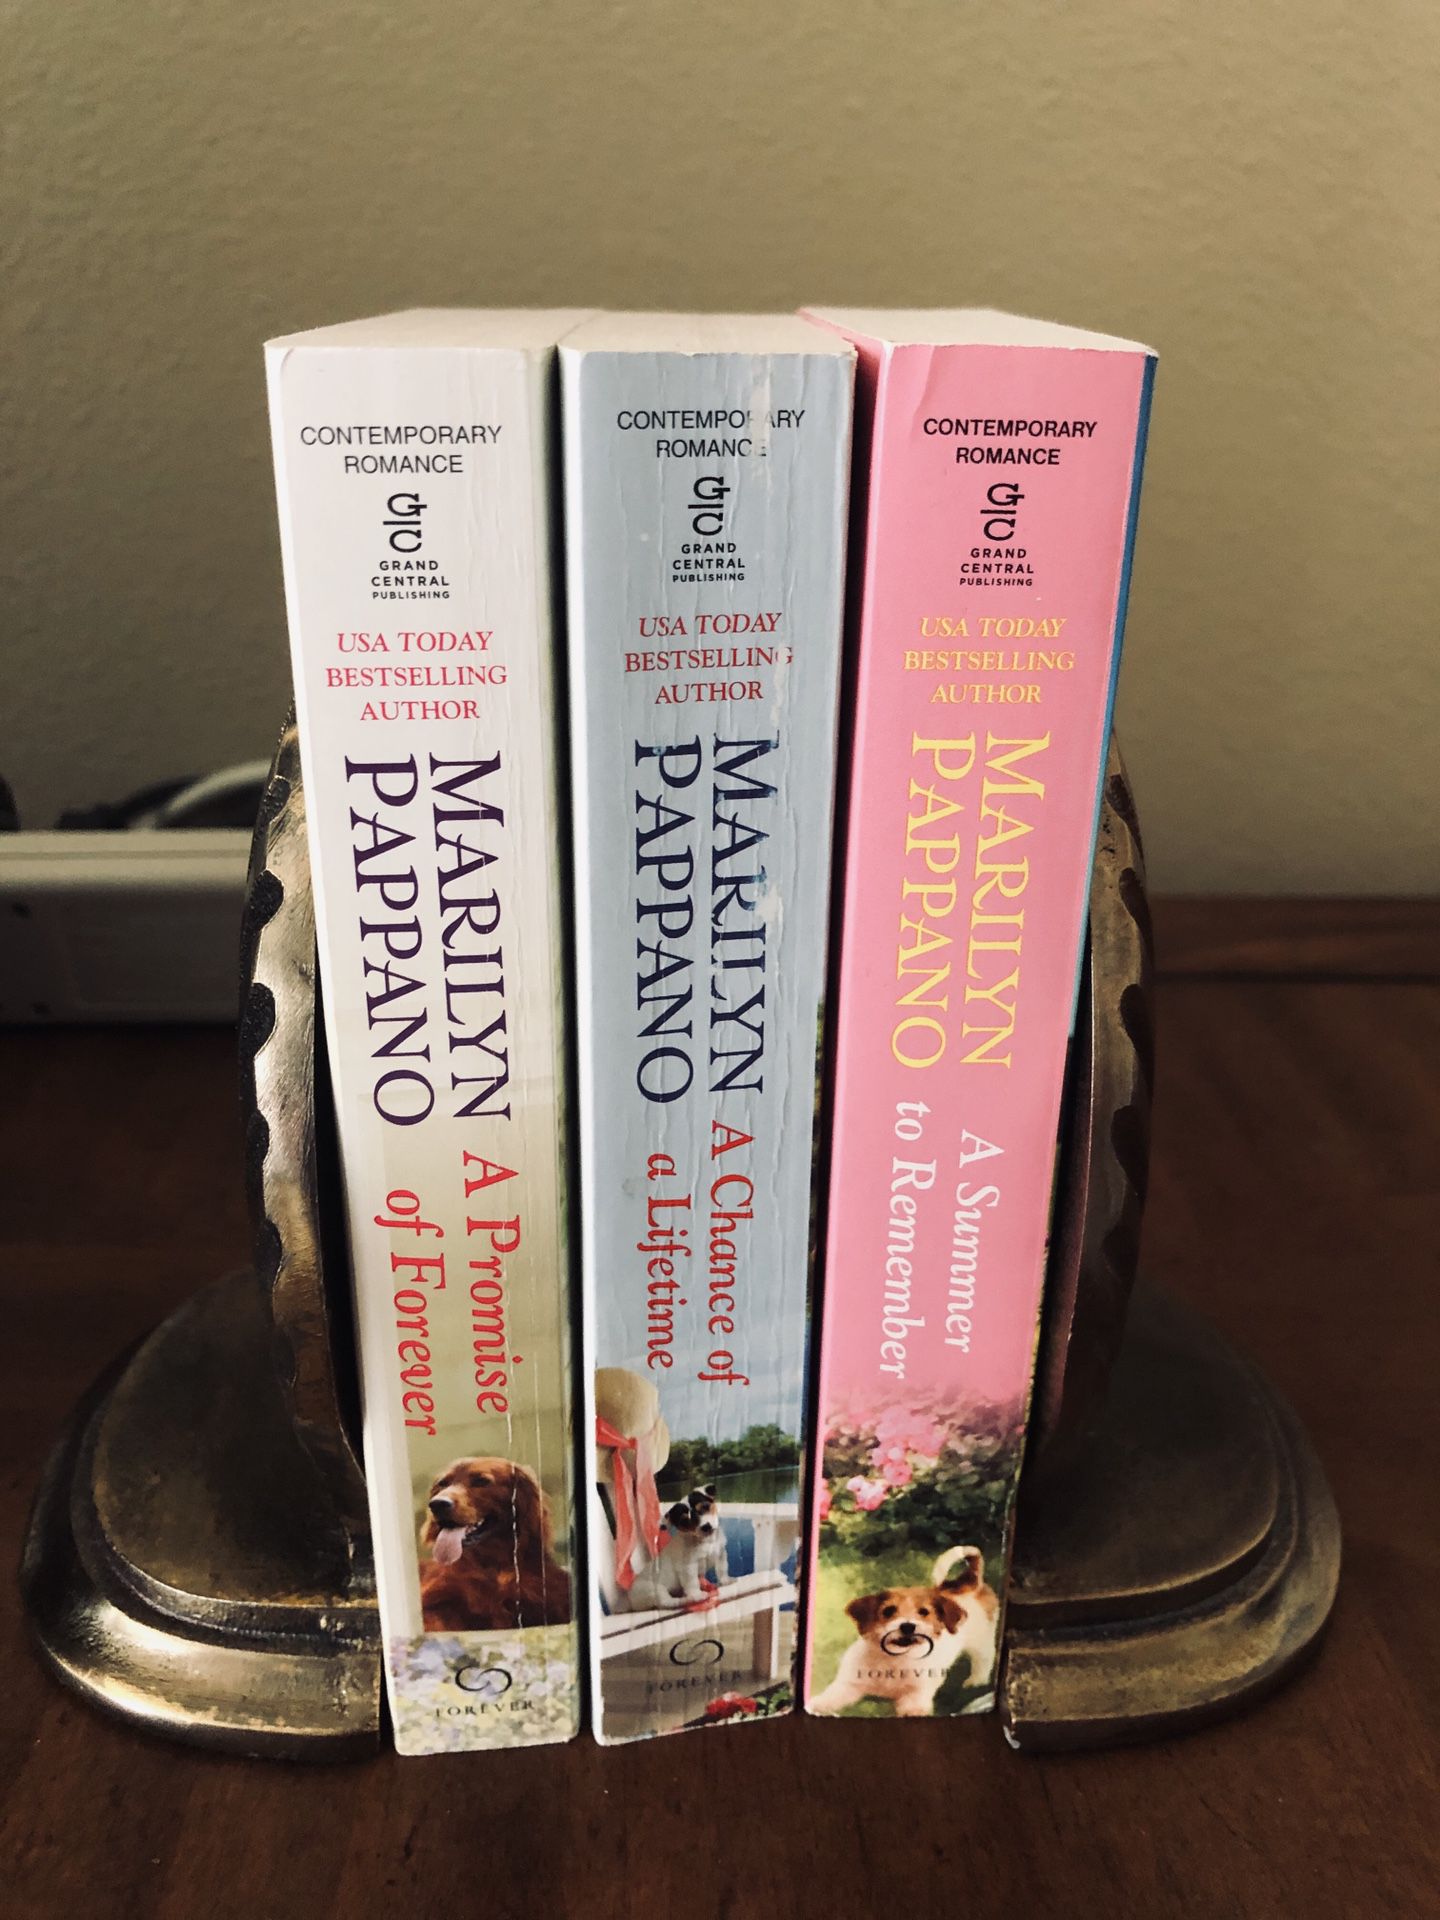 3 Marilyn Pappano books